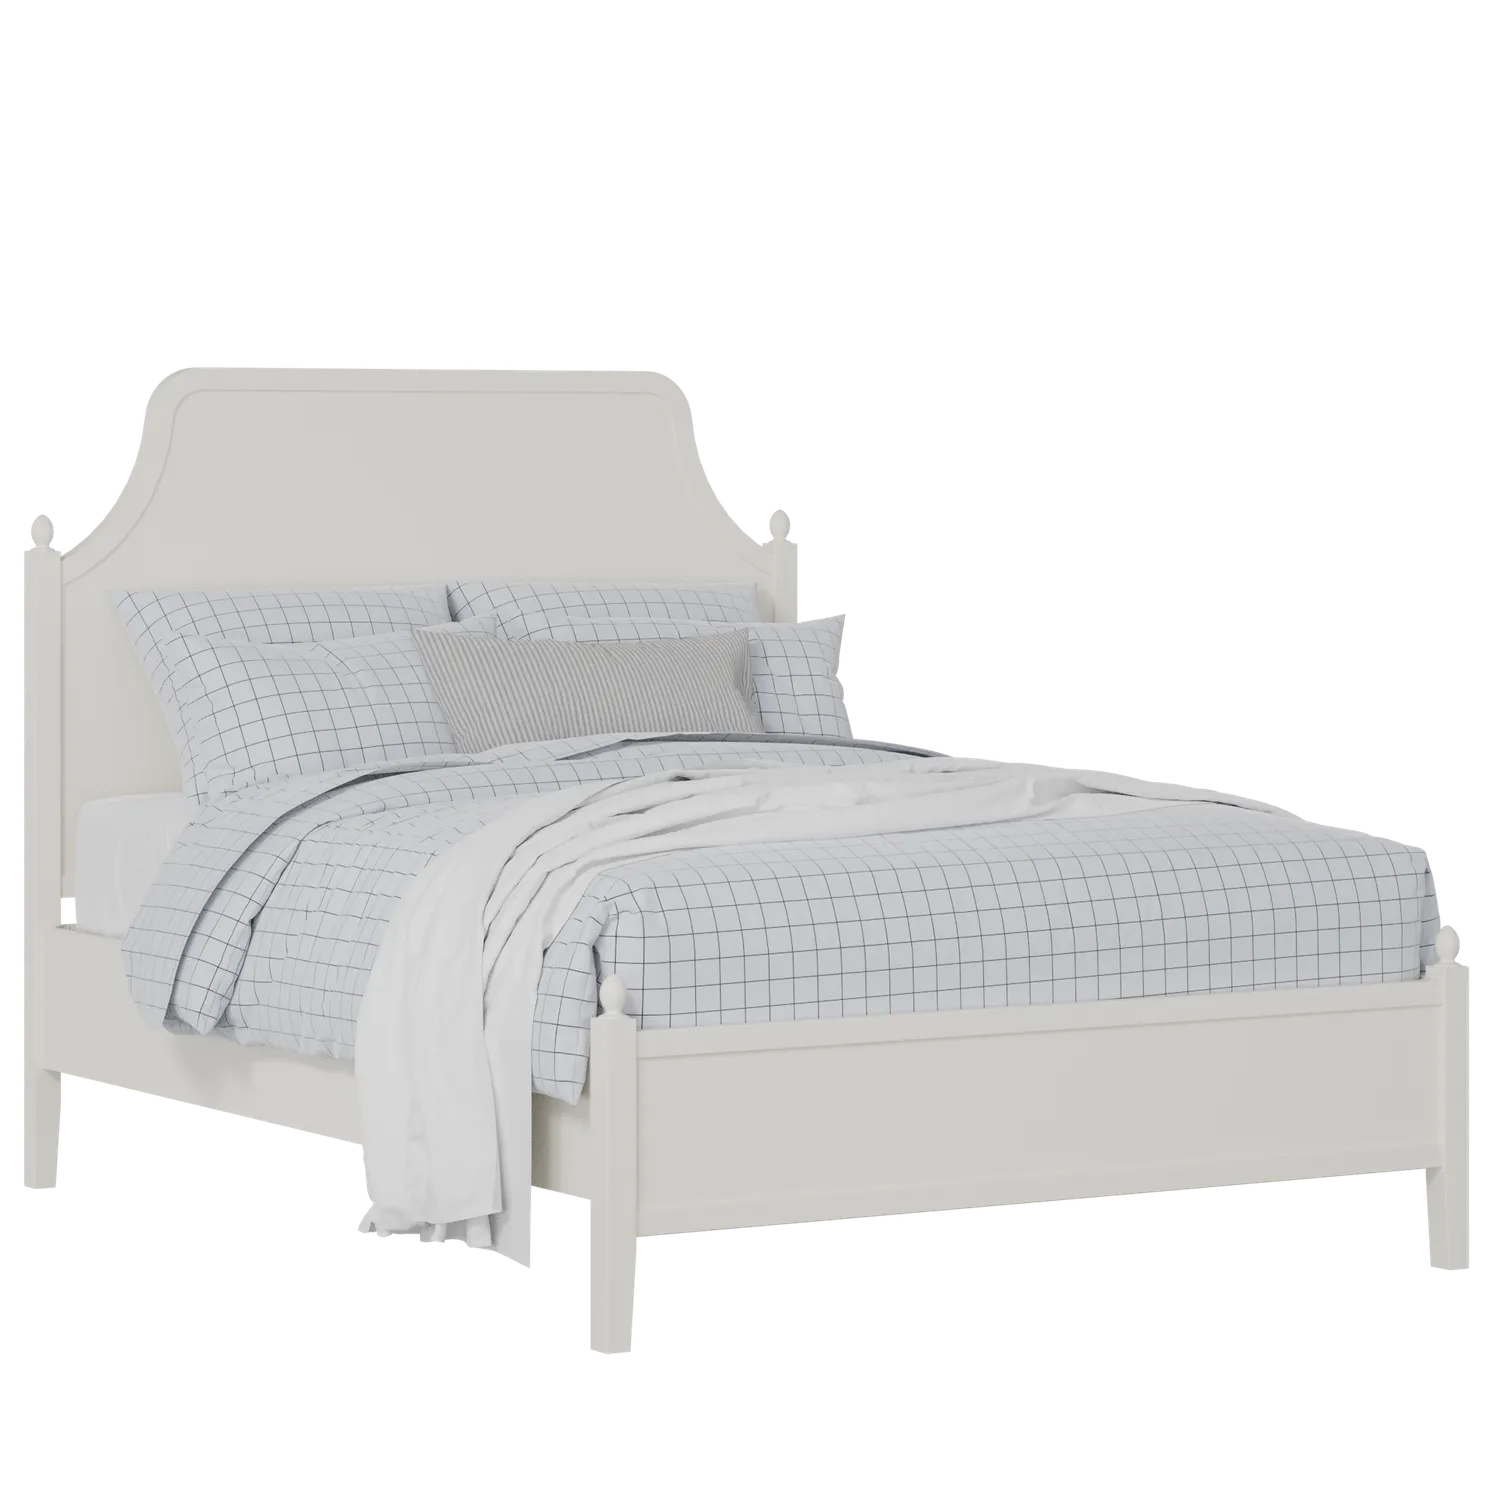 Ruskin Slim painted wood bed in white with Juno mattress